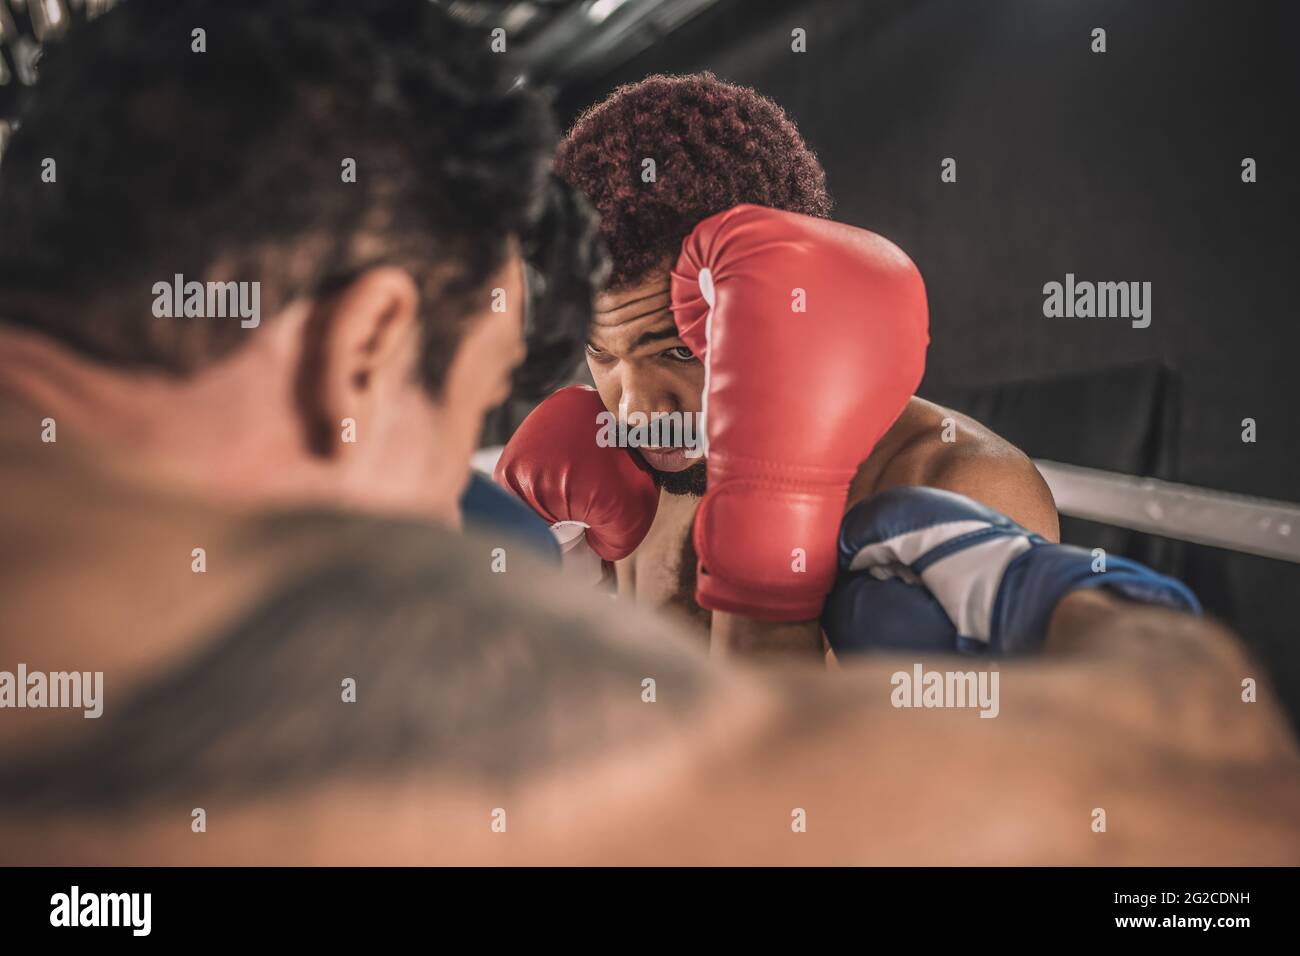 Two kickboxers fighting on a boxing ring and looking aggressive Stock Photo